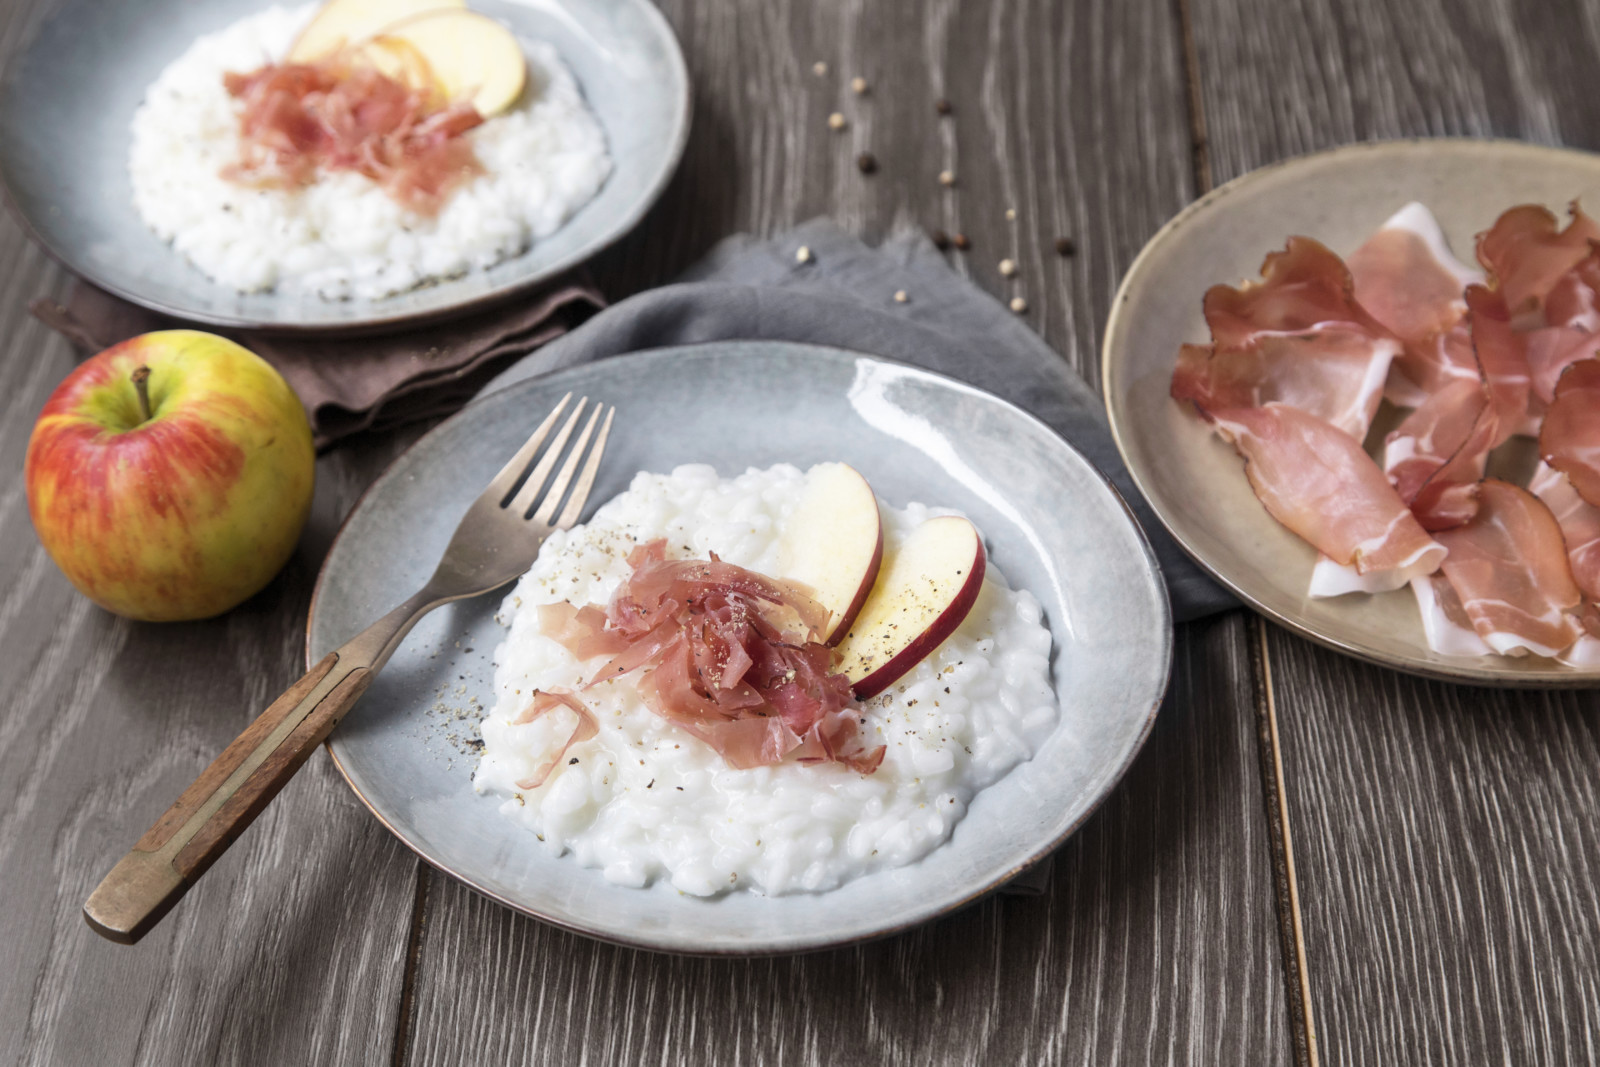 Risotto with SPECK ALTO ADIGE PGI and South-Tyrolean Apples